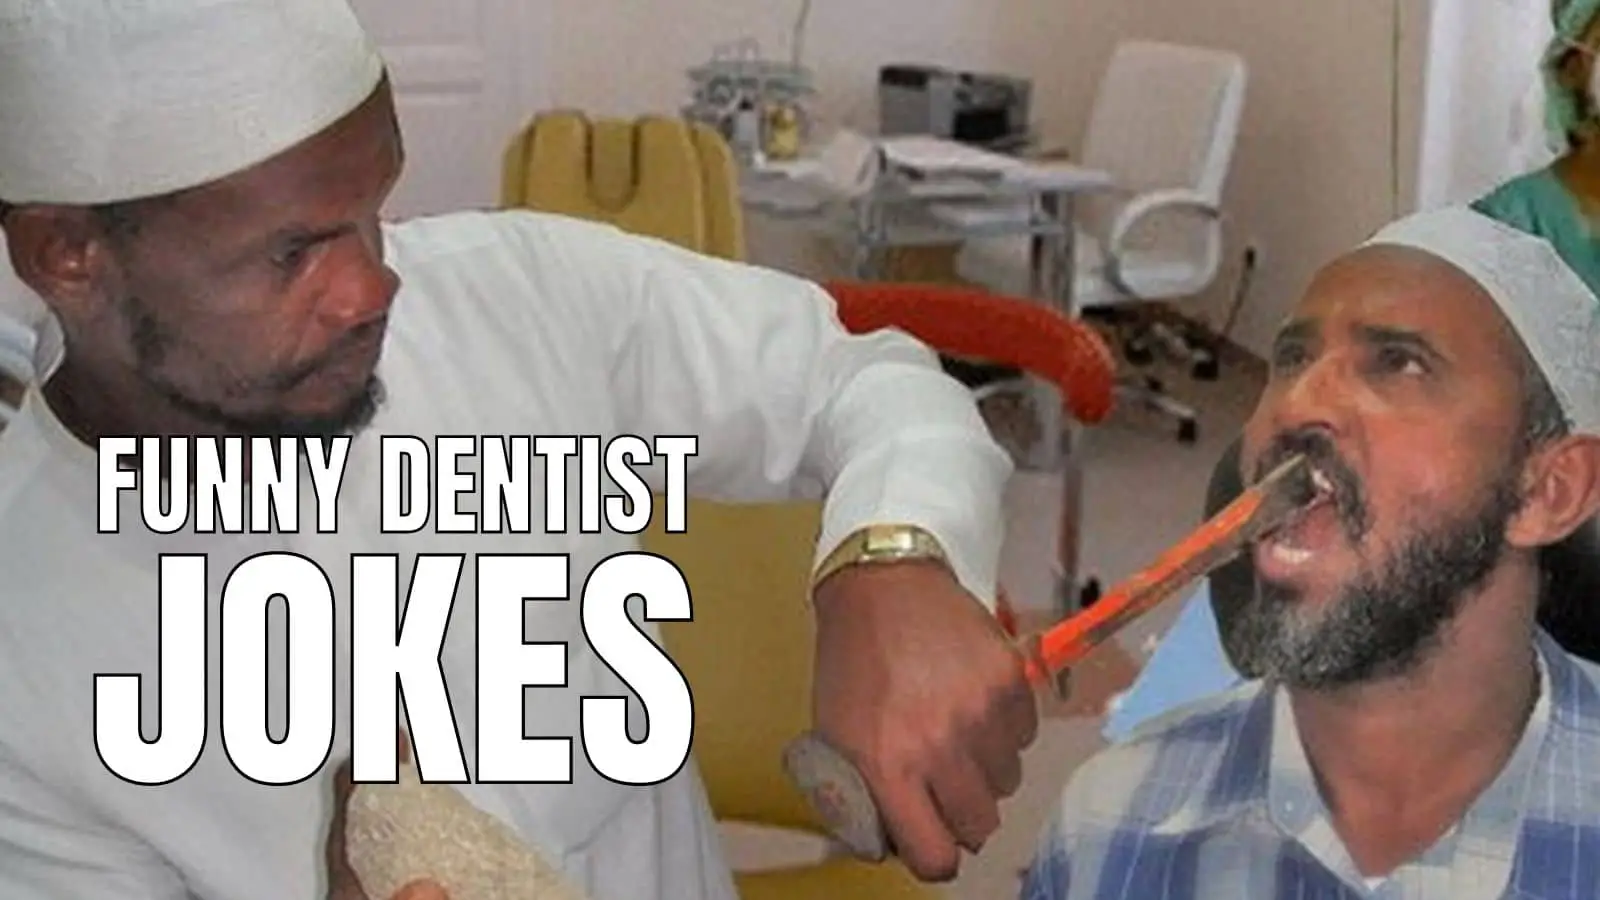 70 Funny Dentist Jokes And Puns to Get Your Fill of Dental
Humor